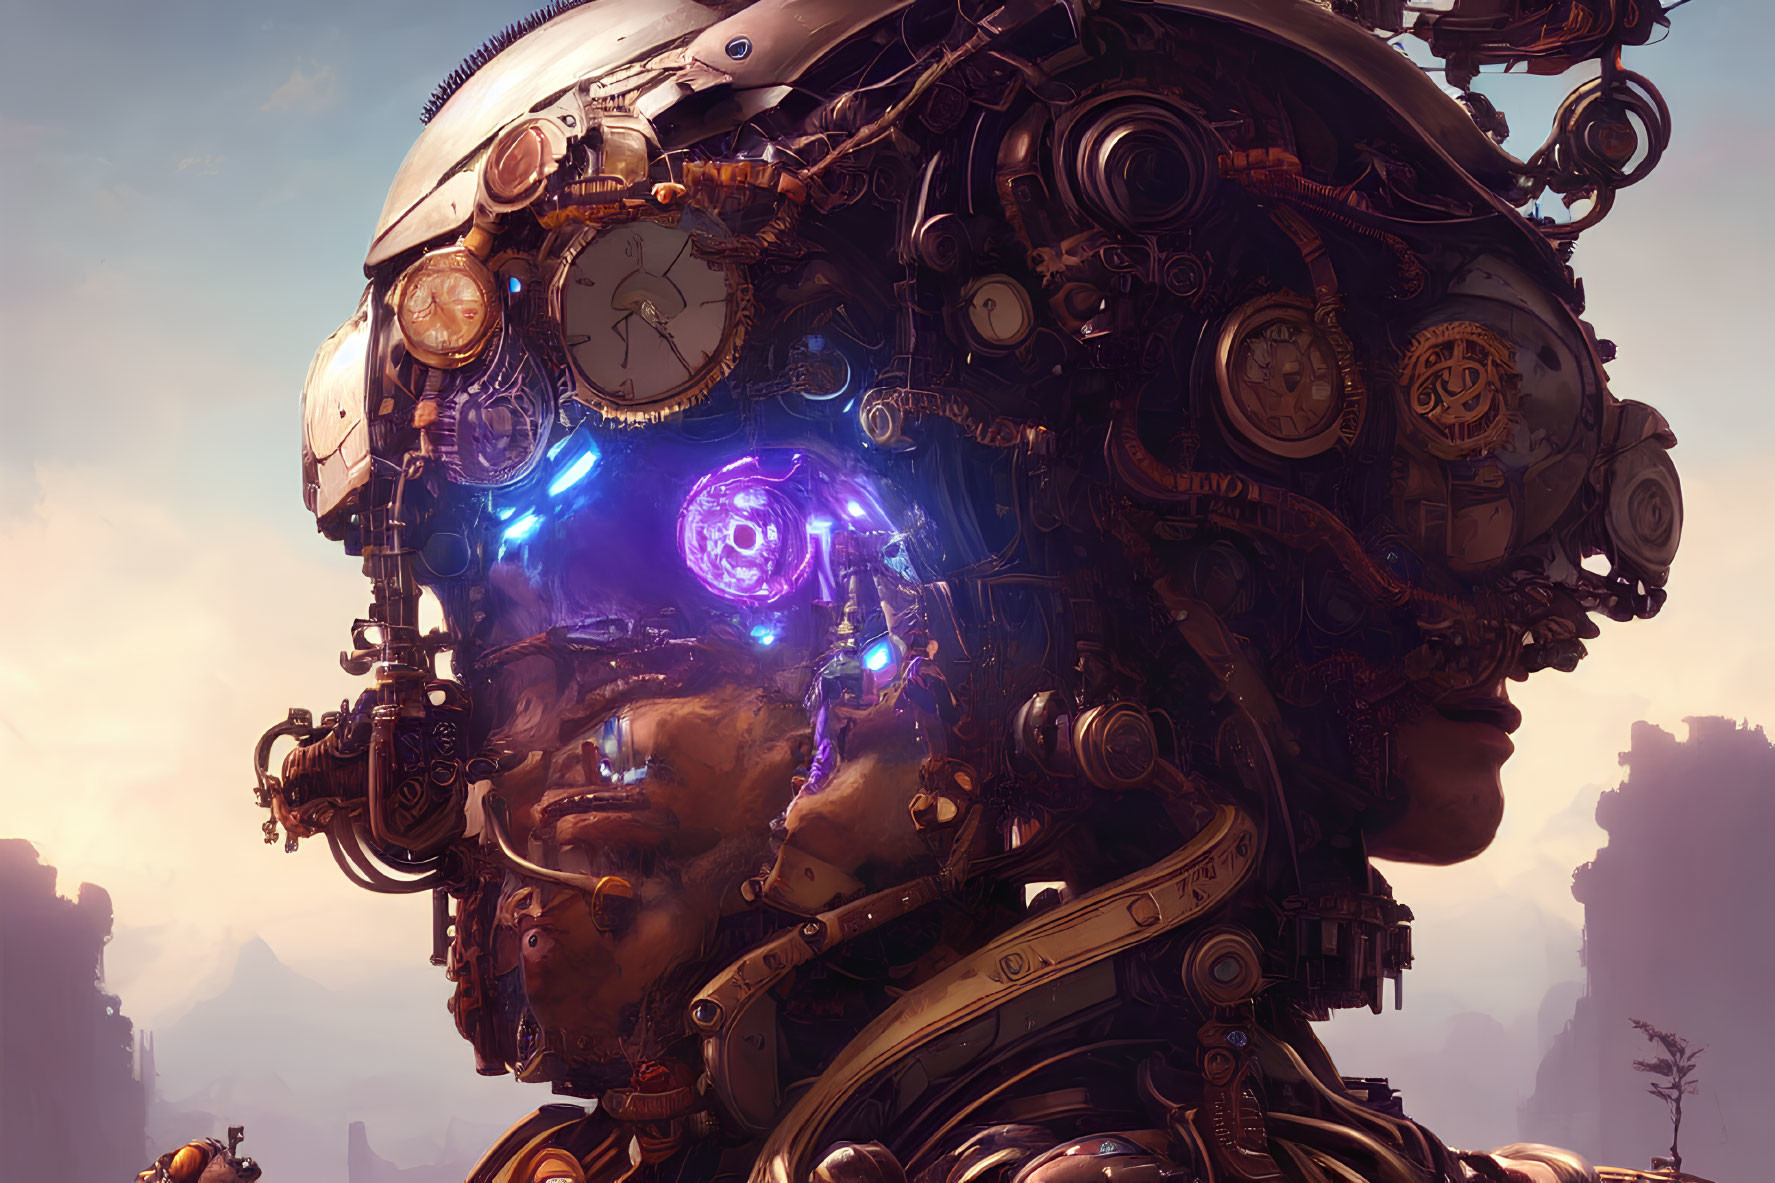 Detailed mechanical head with intricate gears and glowing purple lights.